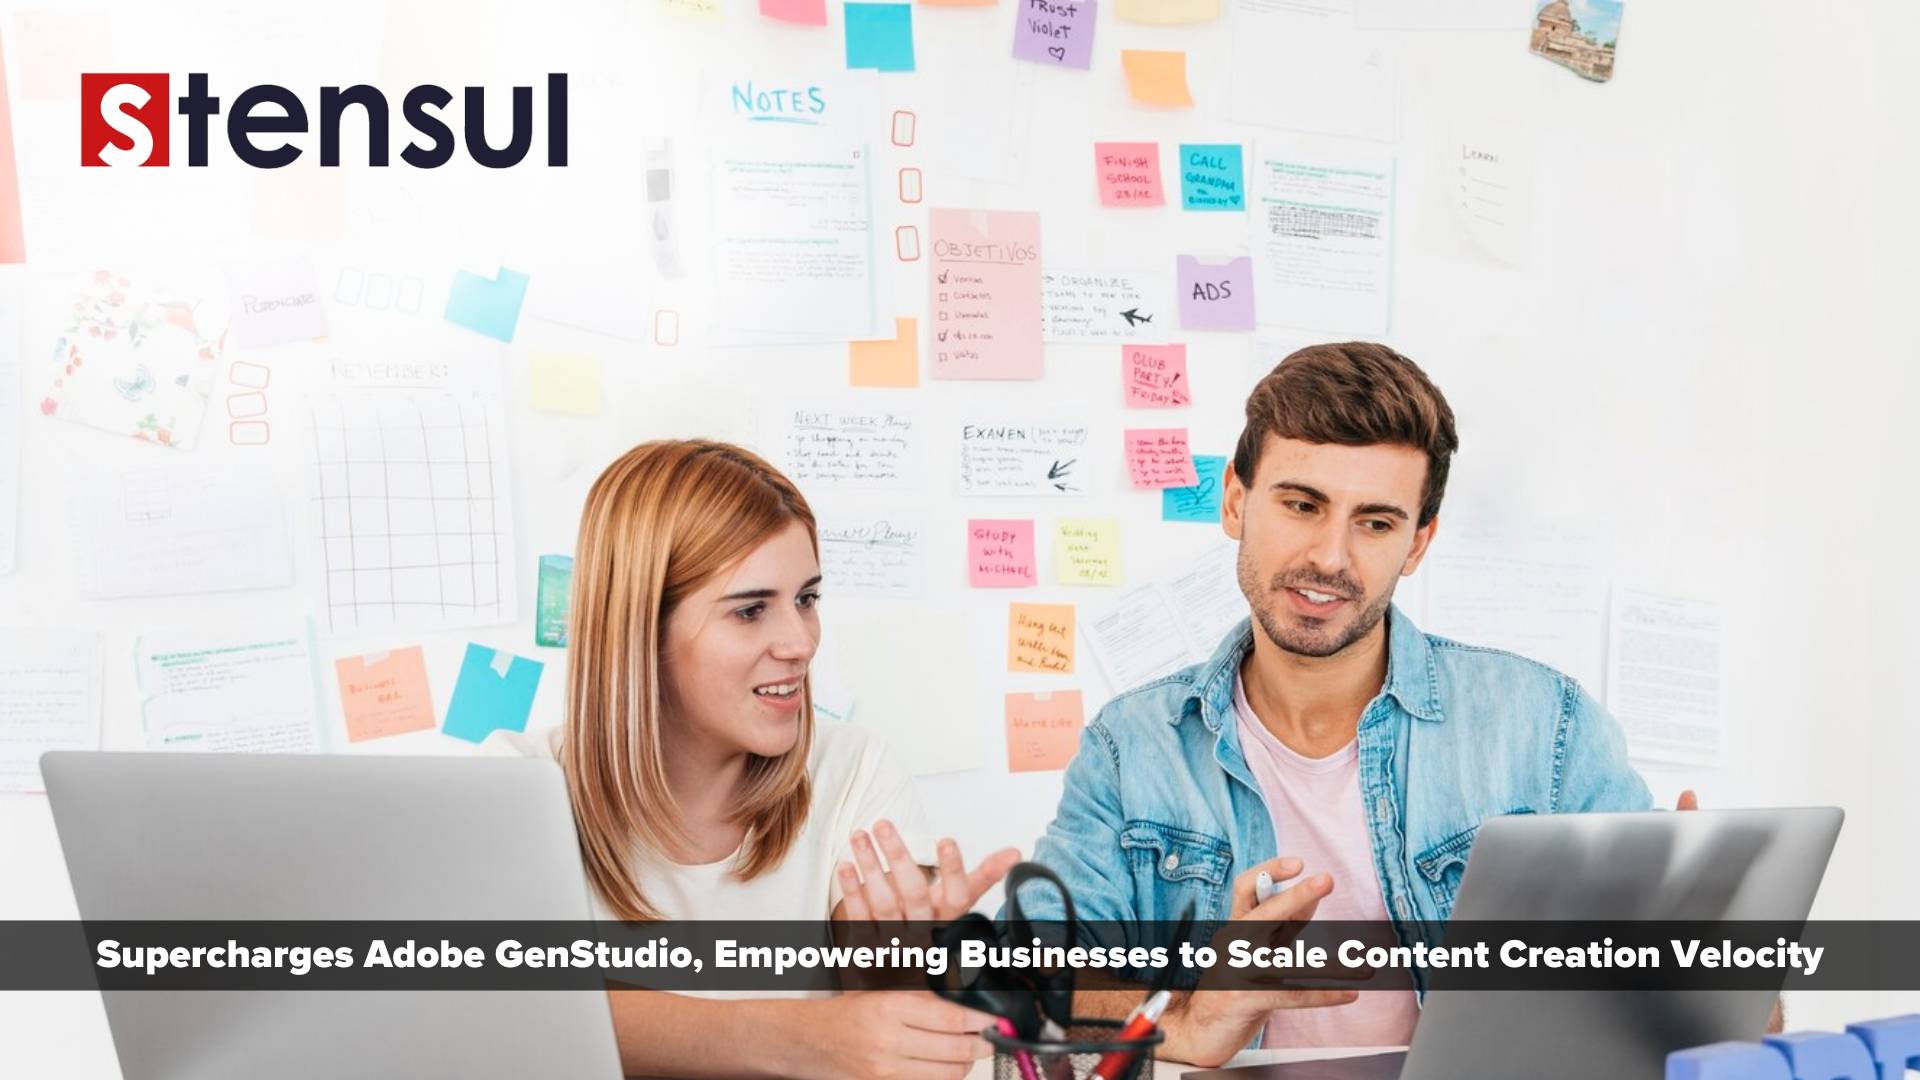 Stensul Supercharges Adobe GenStudio, Empowering Businesses to Scale Content Creation Velocity